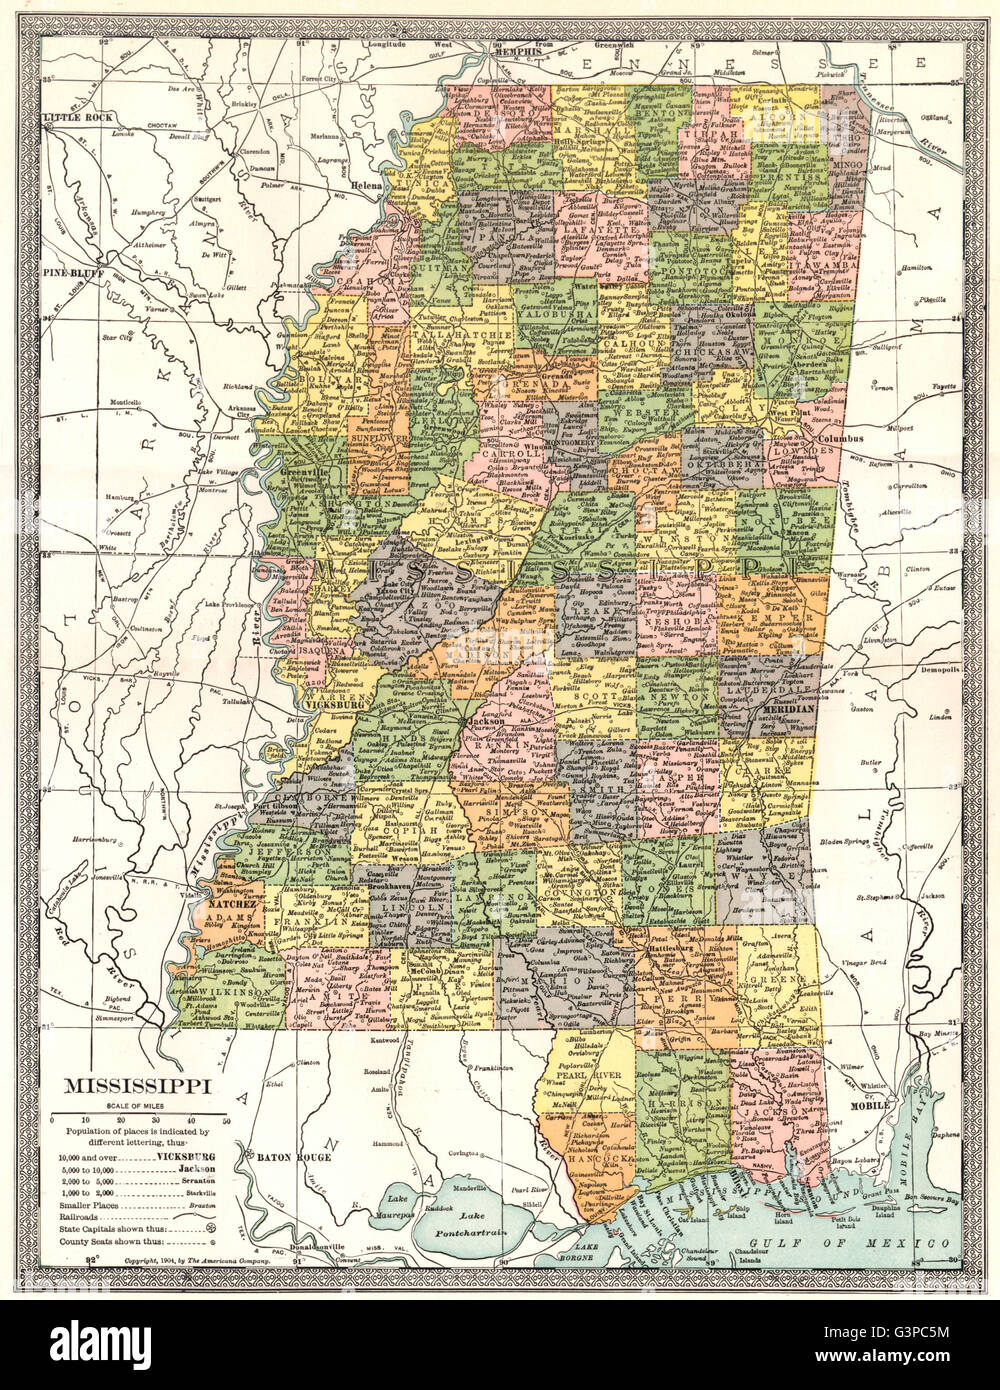 MISSISSIPPI state map. Counties, 1907 Stock Photo